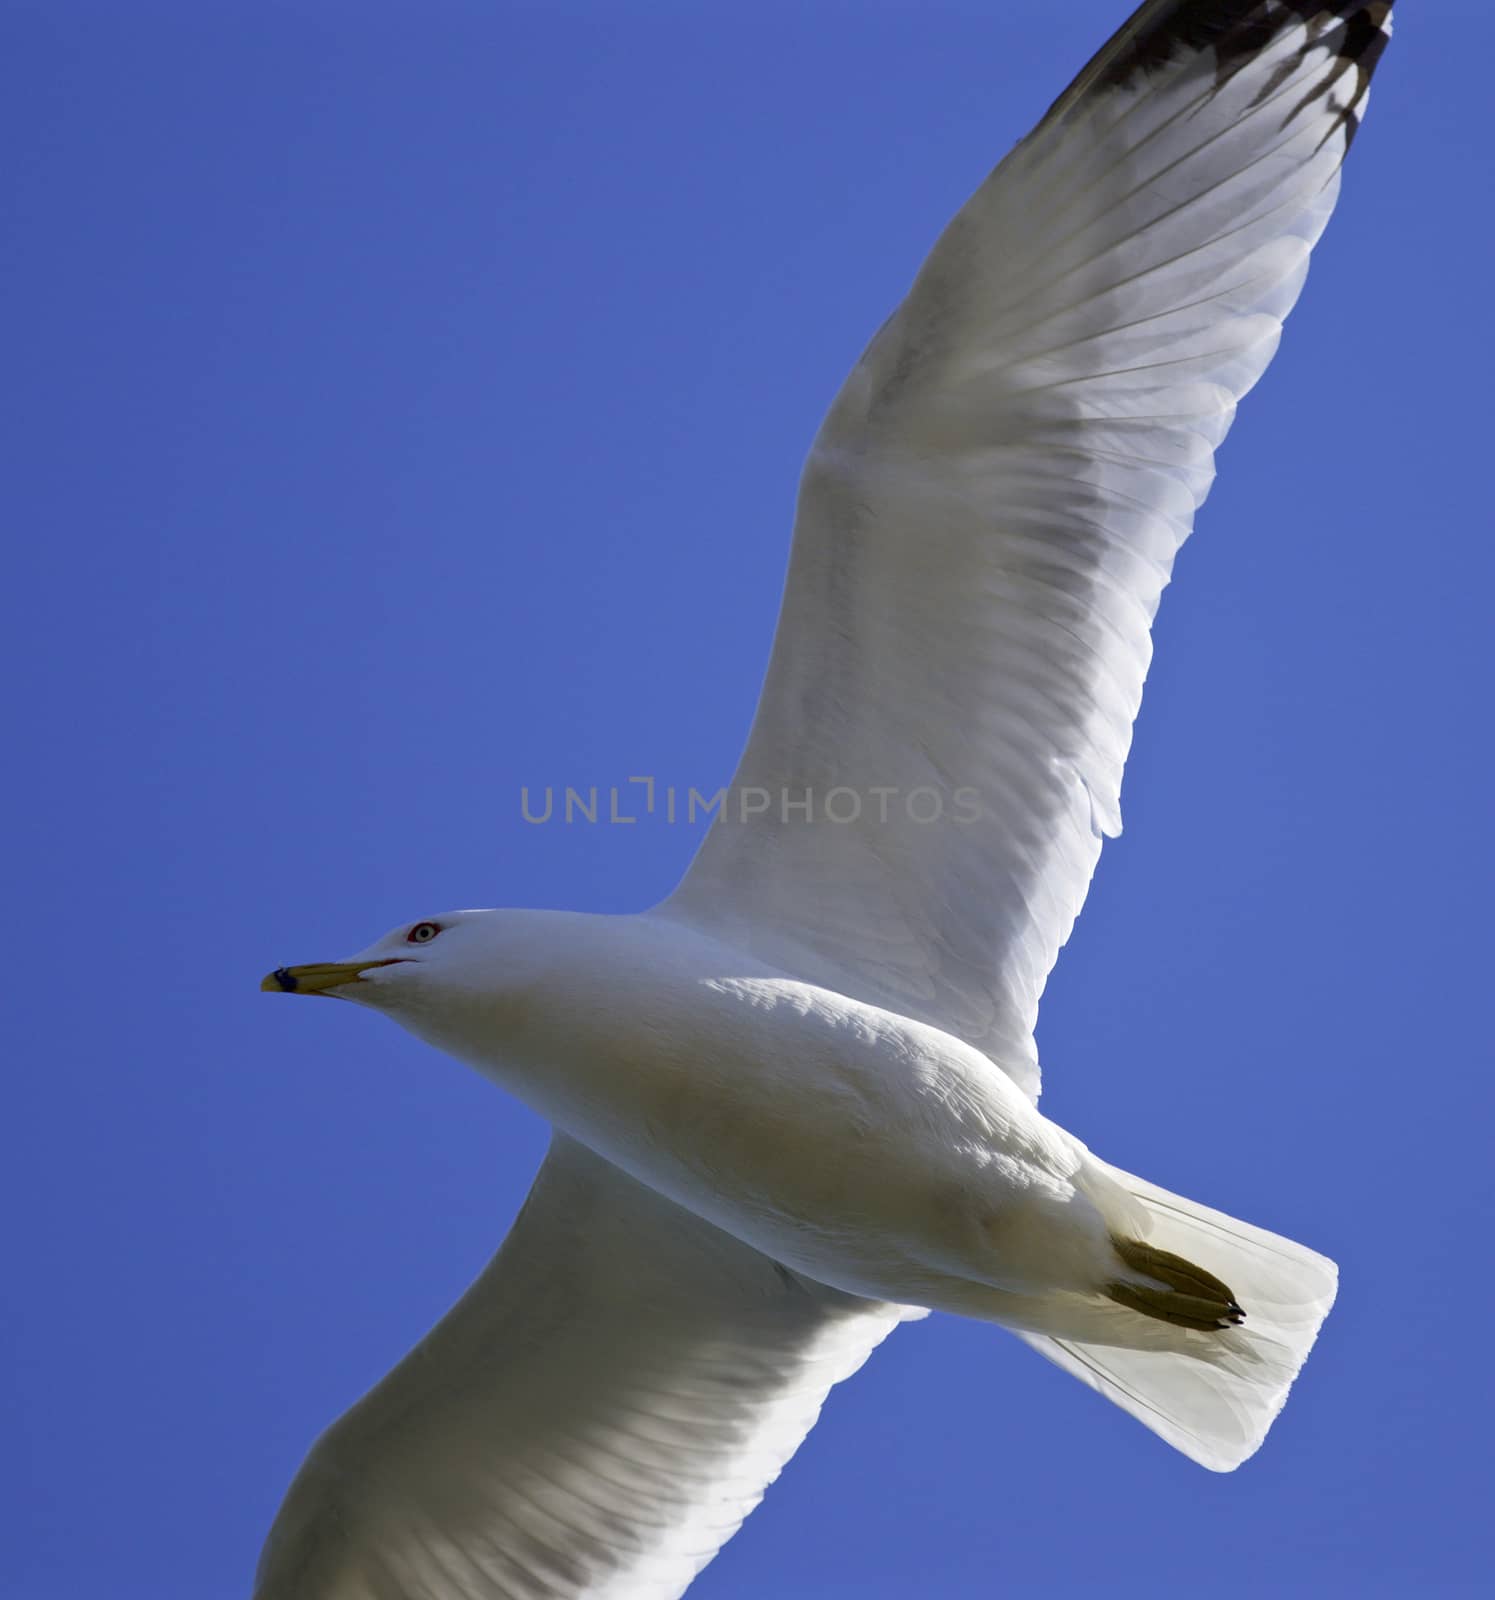 Beautiful isolated image with a flying gull